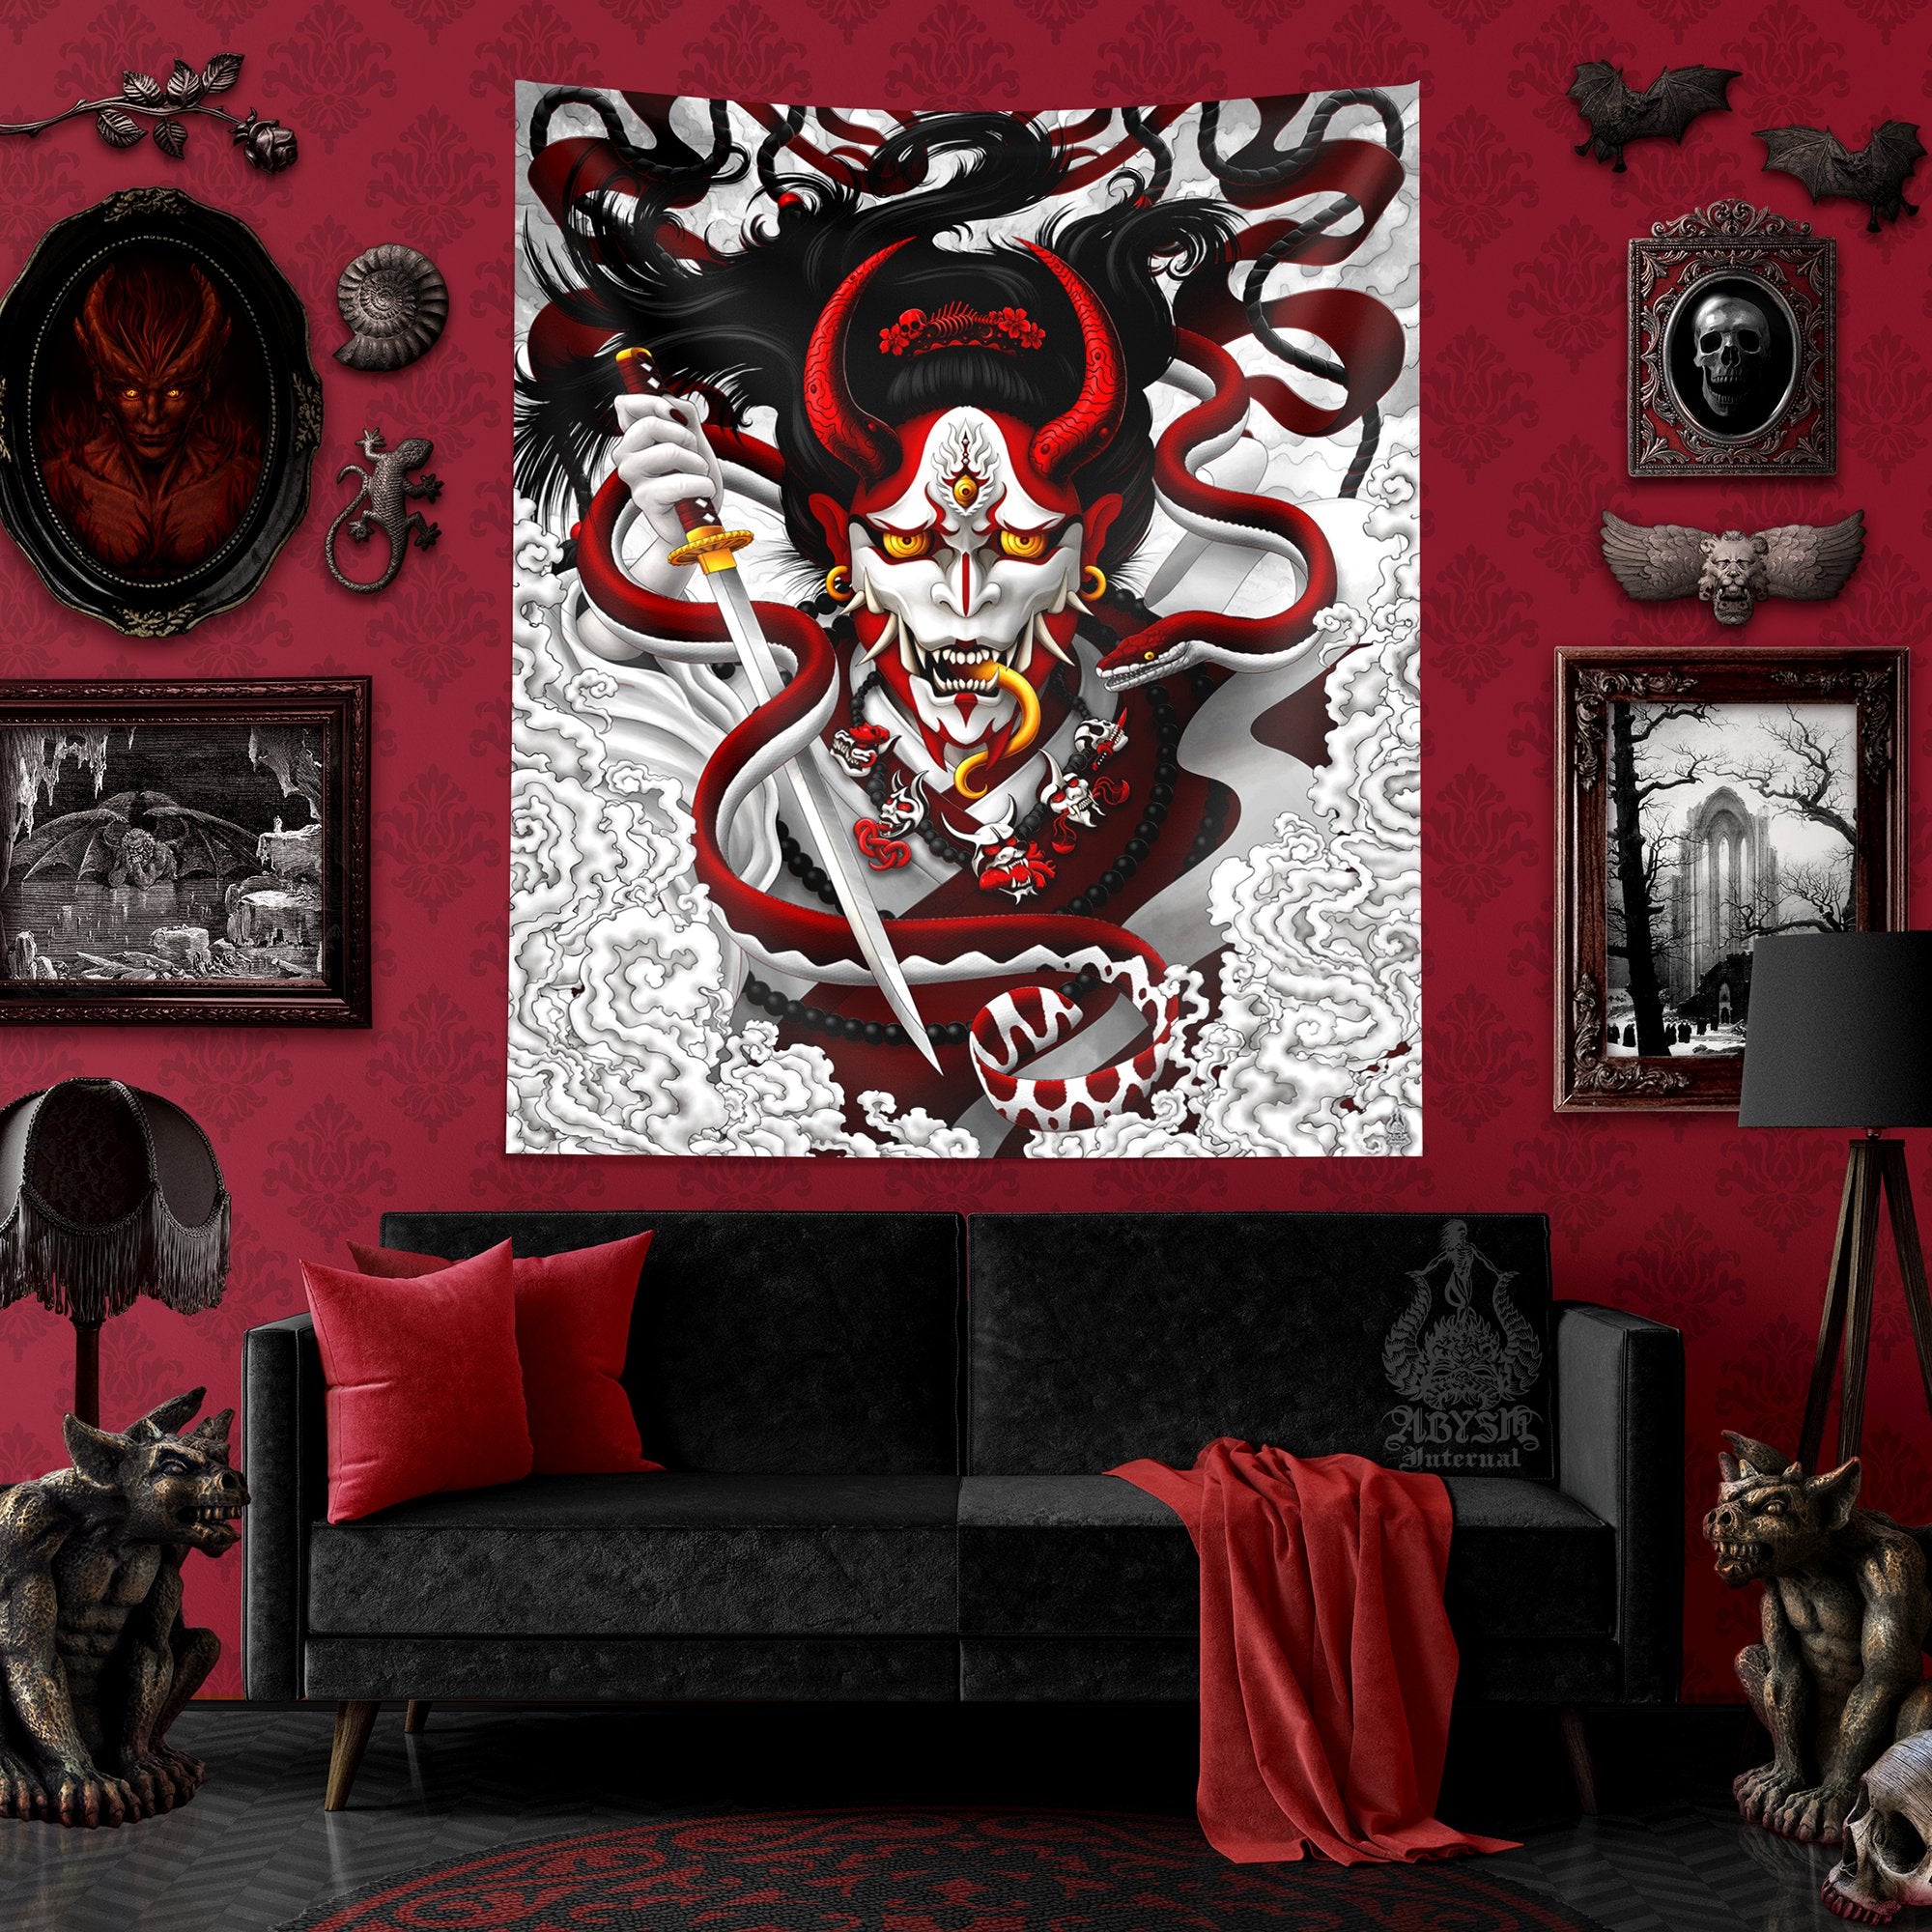 White Goth Demon Tapestry, Japanese Hannya and Snake Wall Hanging, Manga, Anime and Gamer Room Decor, Vertical Art Print - Red - Abysm Internal